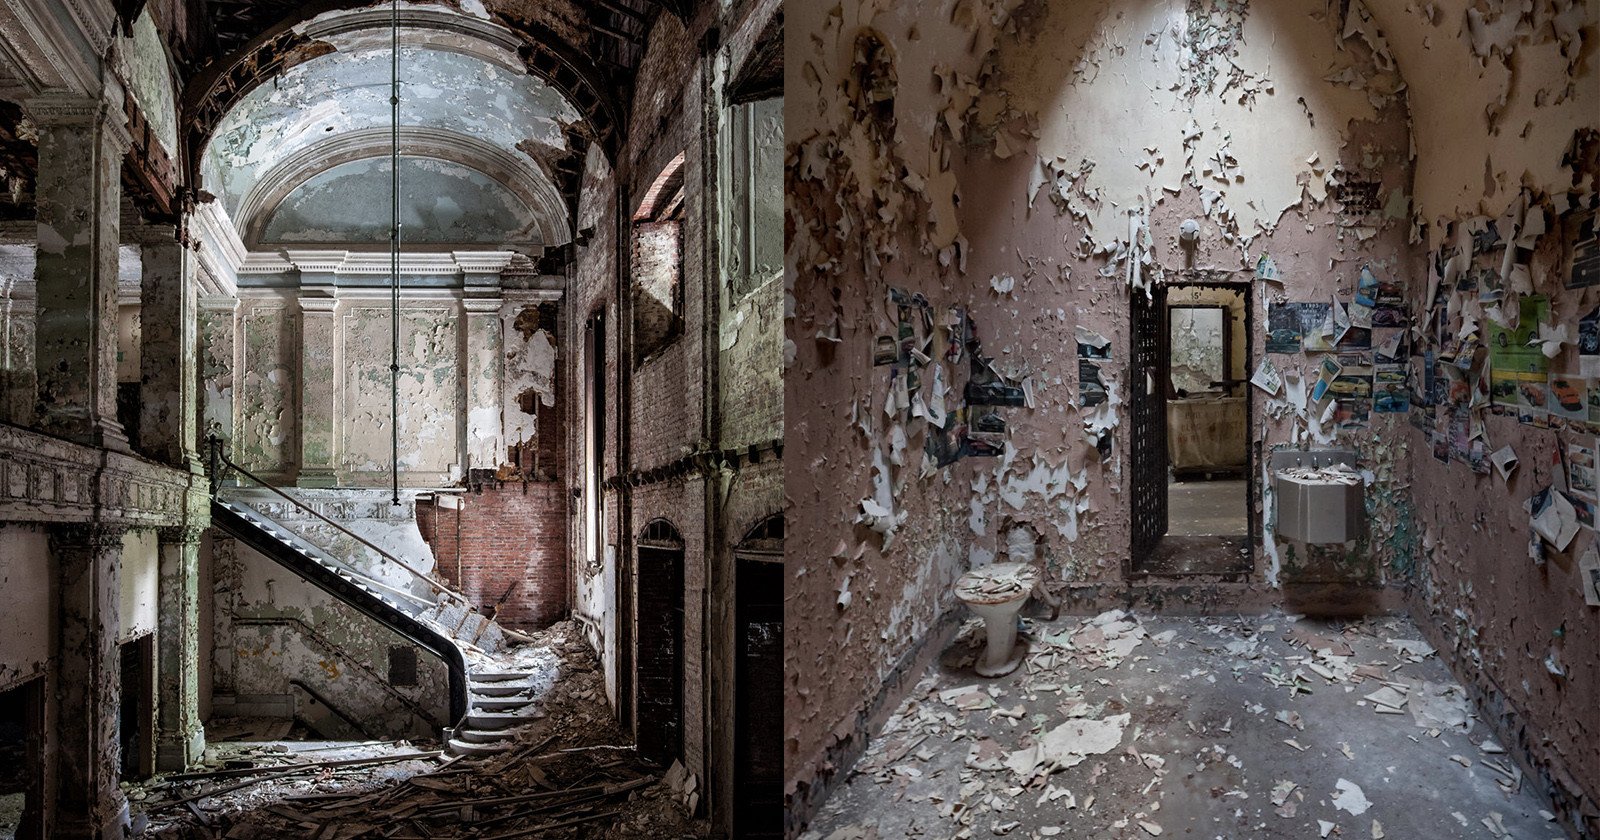 Abandoned America Photo Series Captures History of Forgotten Places